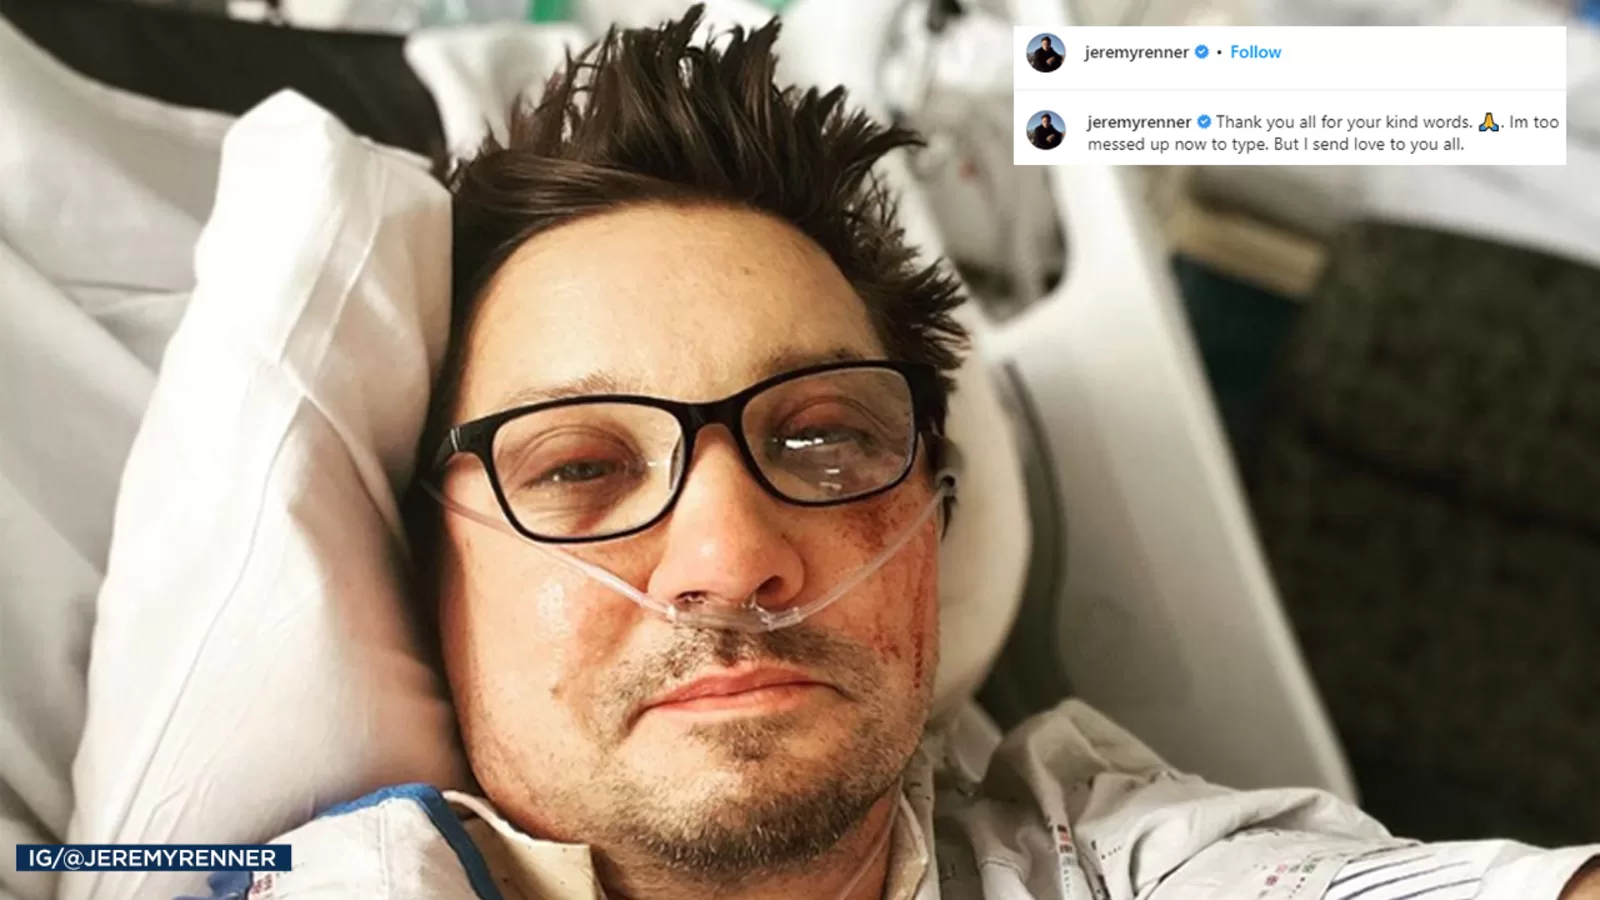 Jeremy Renner update: 'Avengers' star injured by own snowplow while helping stranded family member